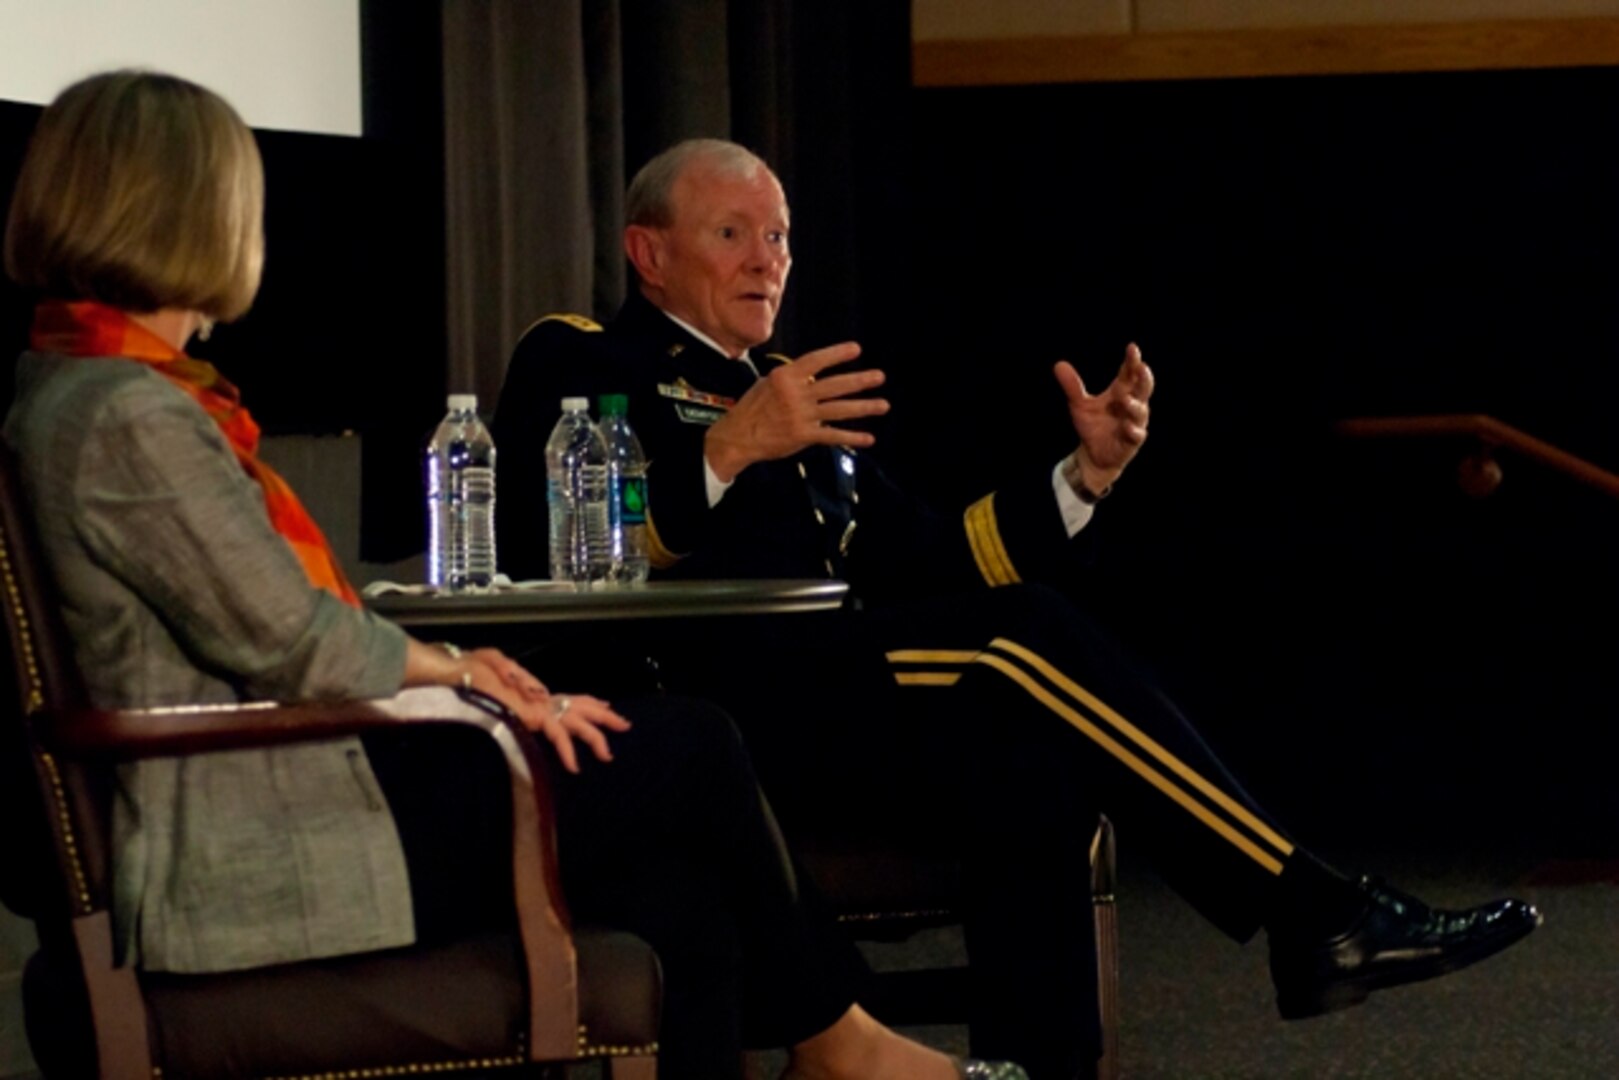 U.S. Army Gen. Martin E. Dempsey, the chairman of the Joint Chiefs of Staff, right, answers a question during a town hall with service members, families and civilians in Seoul, South Korea, Sept. 30, 2013. Dempsey and his wife, Deanie Dempsey, visited with over 300 military community members stationed throughout South Korea, where they spoke about the goals and challenges of the Department of Defense. (Photo by Army Staff Sgt. Luke A. Graziani)